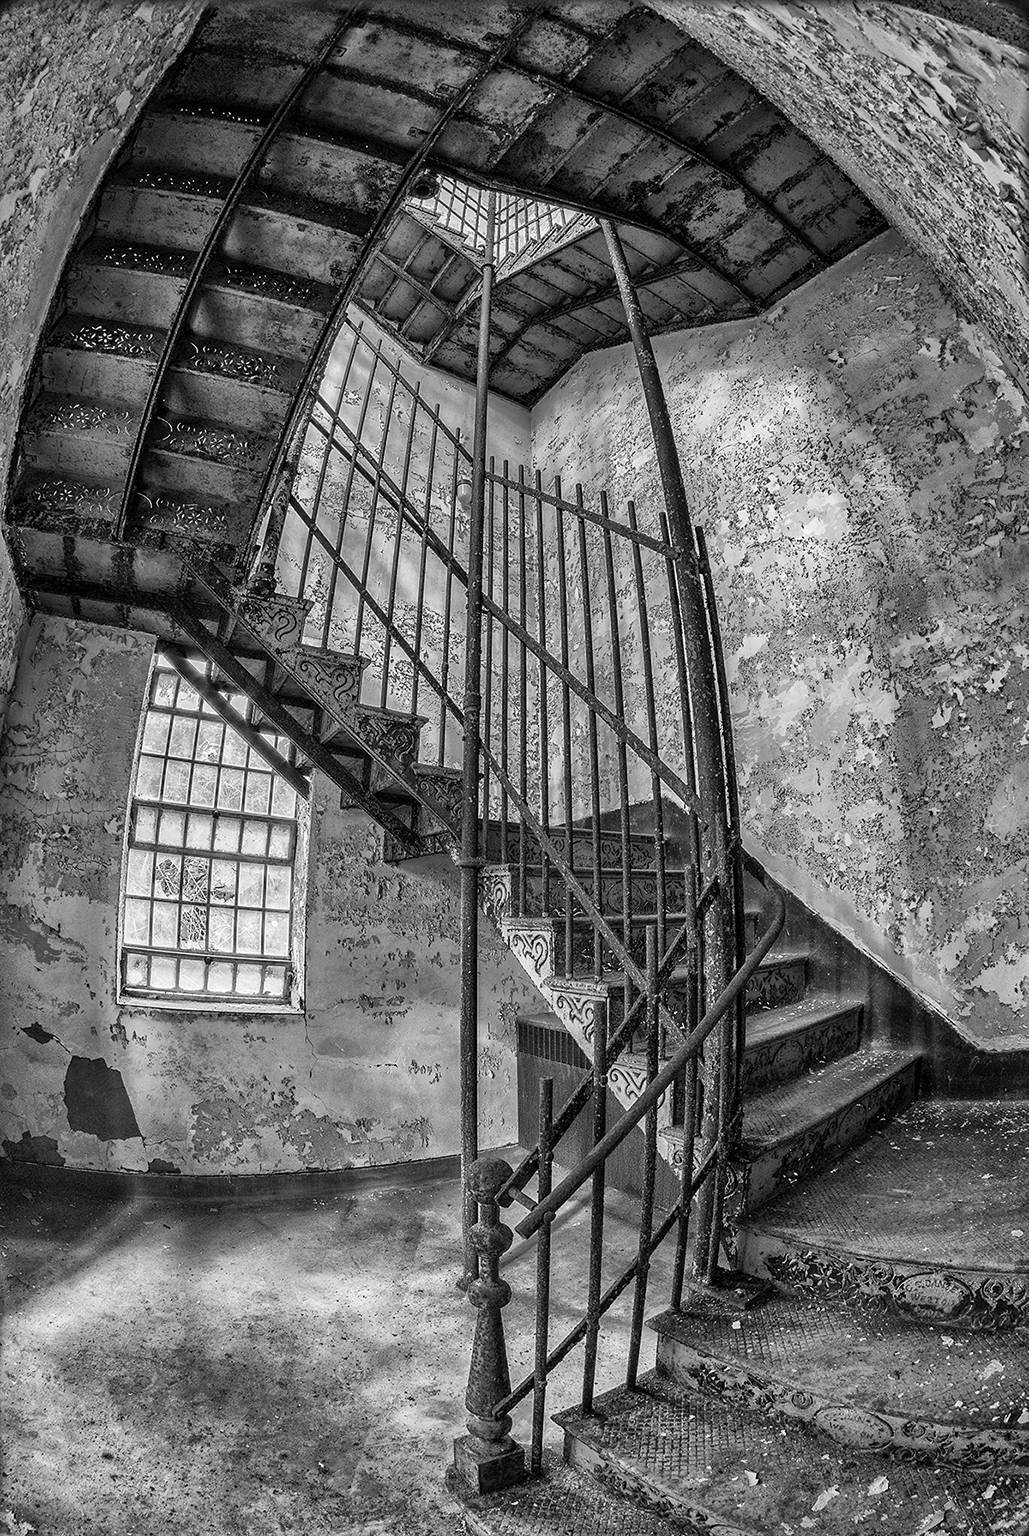 "Stairway", contemporary, black and white, abandoned, iron, steel, photograph - Photograph by Rebecca Skinner